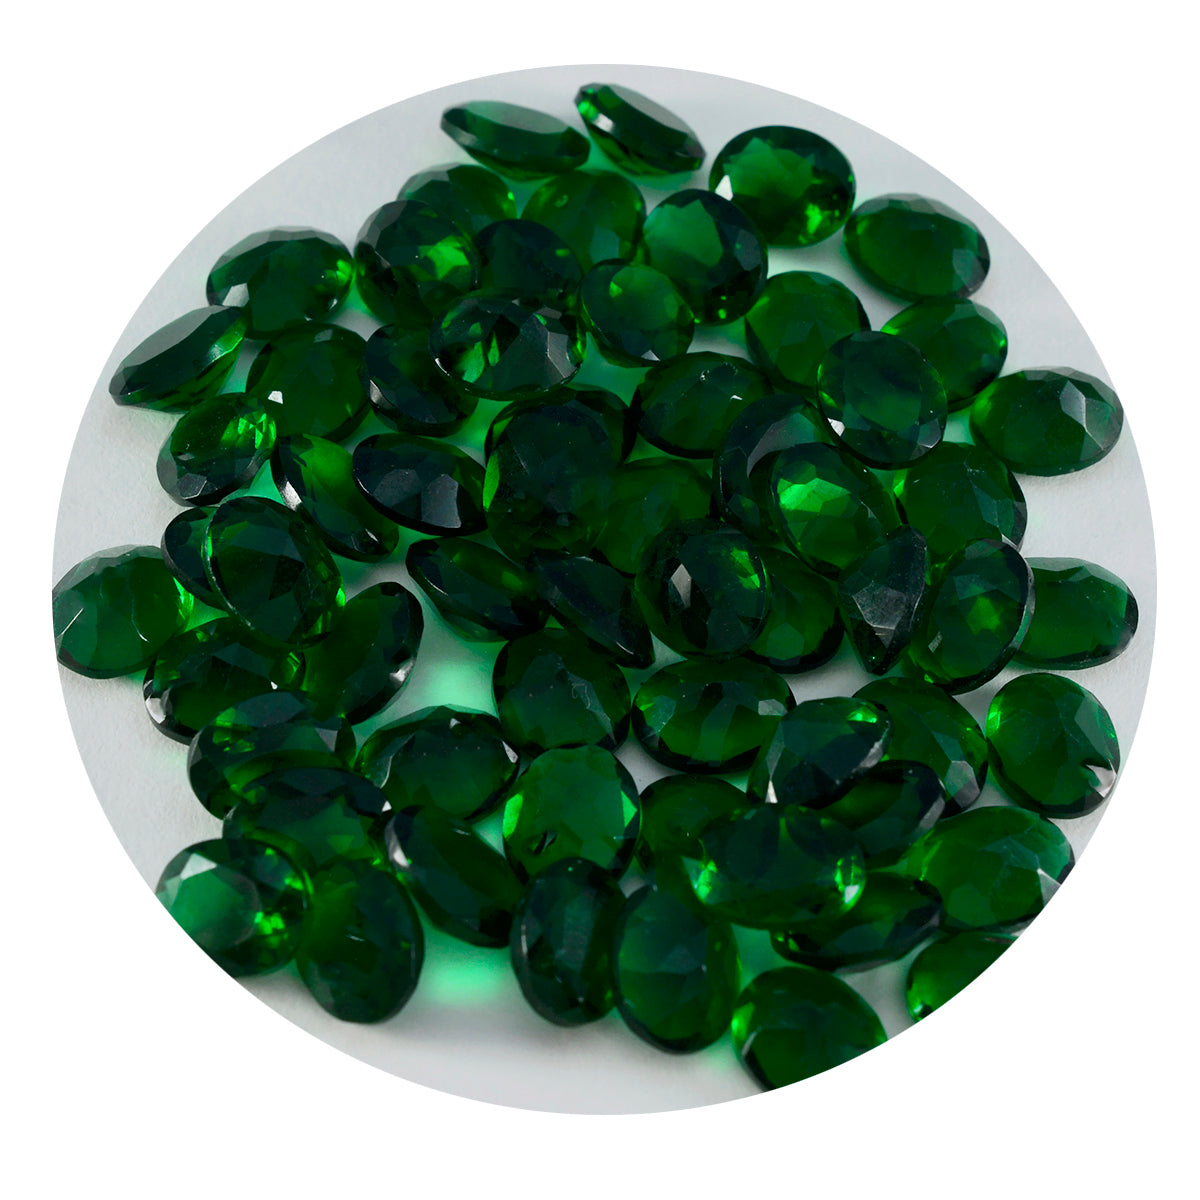 Riyogems 1PC Green Emerald CZ Faceted 5x7 mm Oval Shape attractive Quality Loose Stone